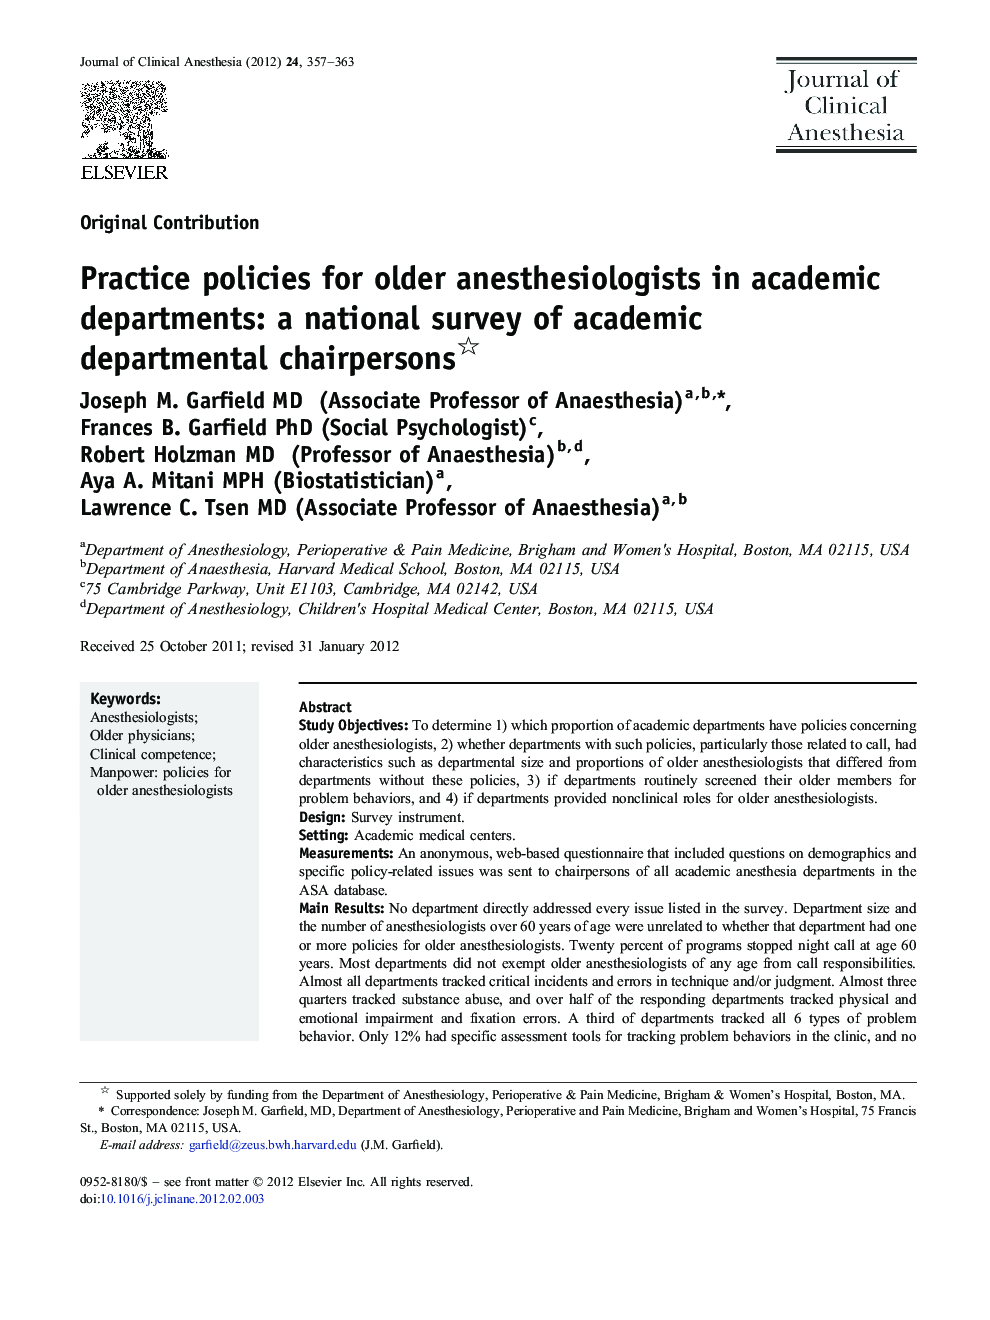 Practice policies for older anesthesiologists in academic departments: a national survey of academic departmental chairpersons 